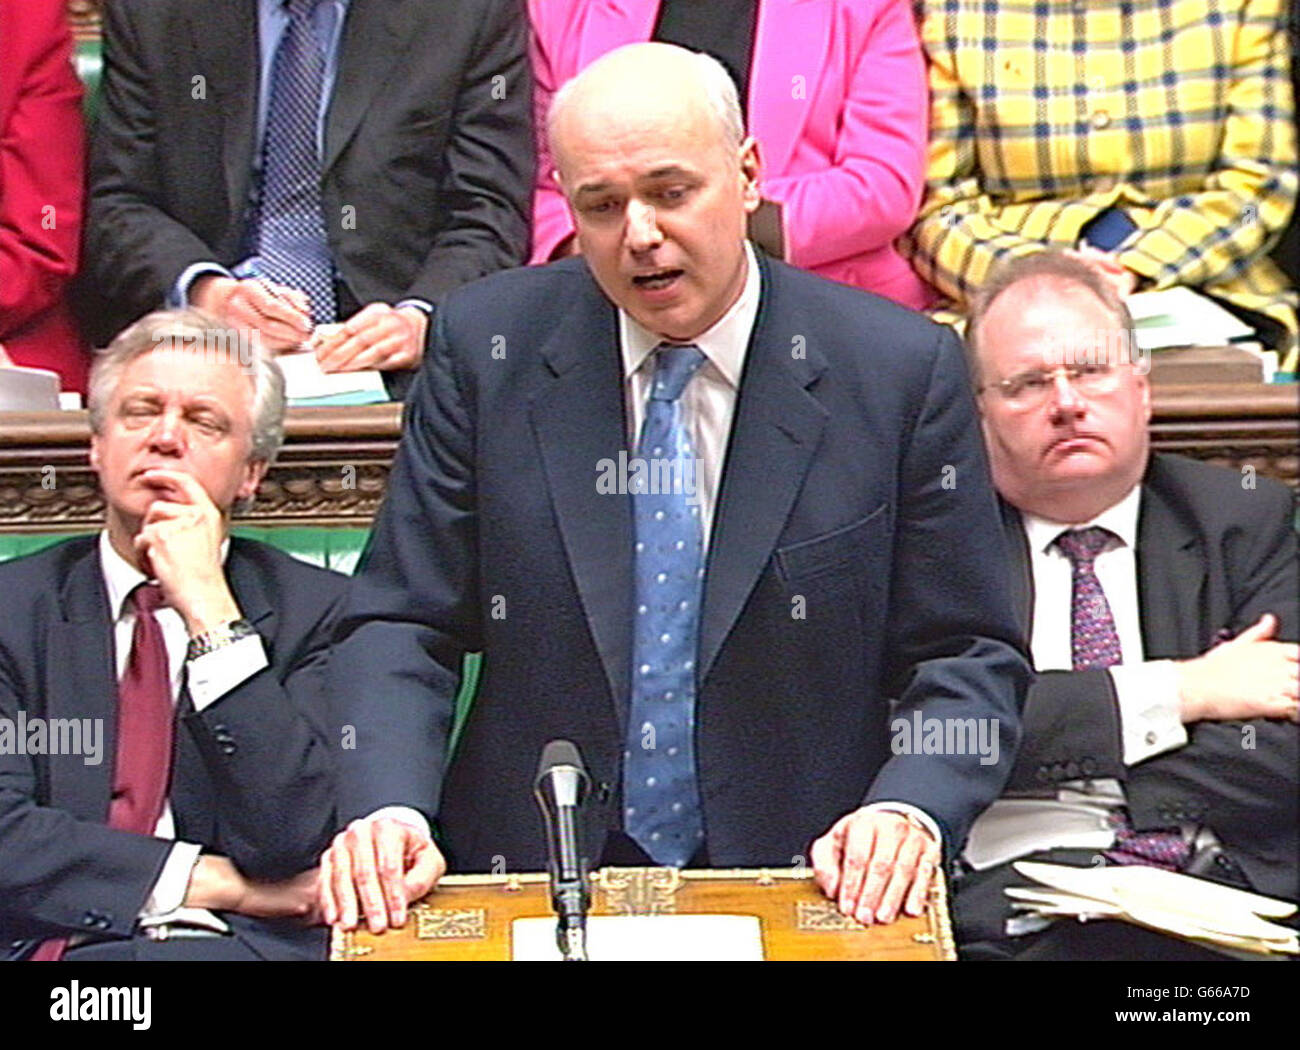 : Video grab of leader of the opposition, Iain Duncan Smith, during Prime Minister's Questions at the House of Commons. Stock Photo